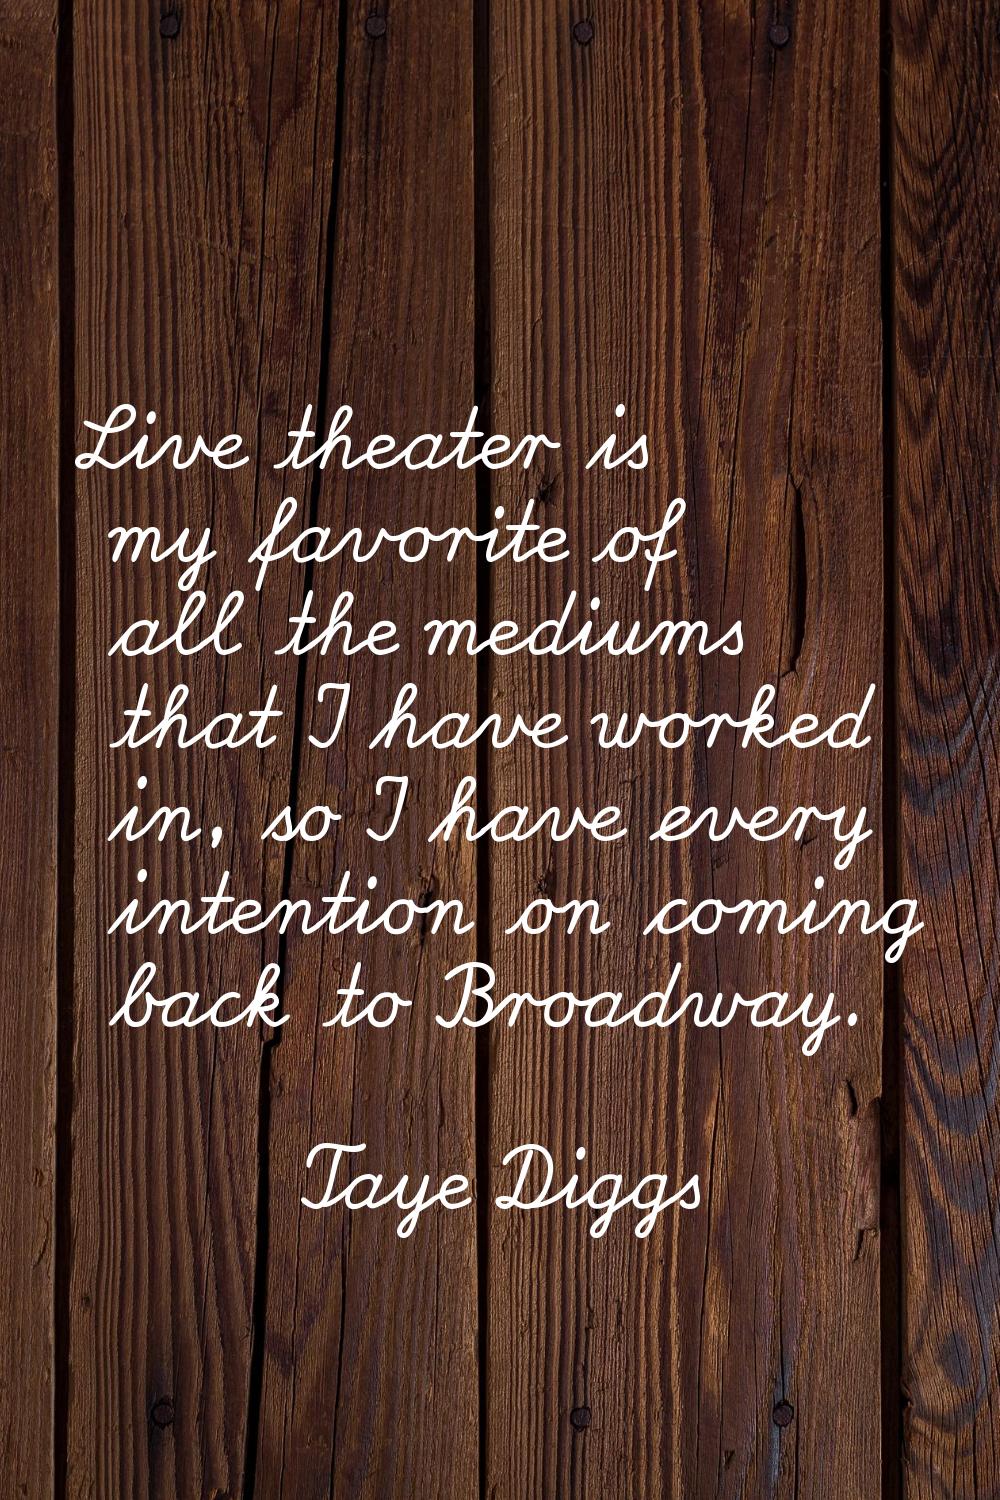 Live theater is my favorite of all the mediums that I have worked in, so I have every intention on 